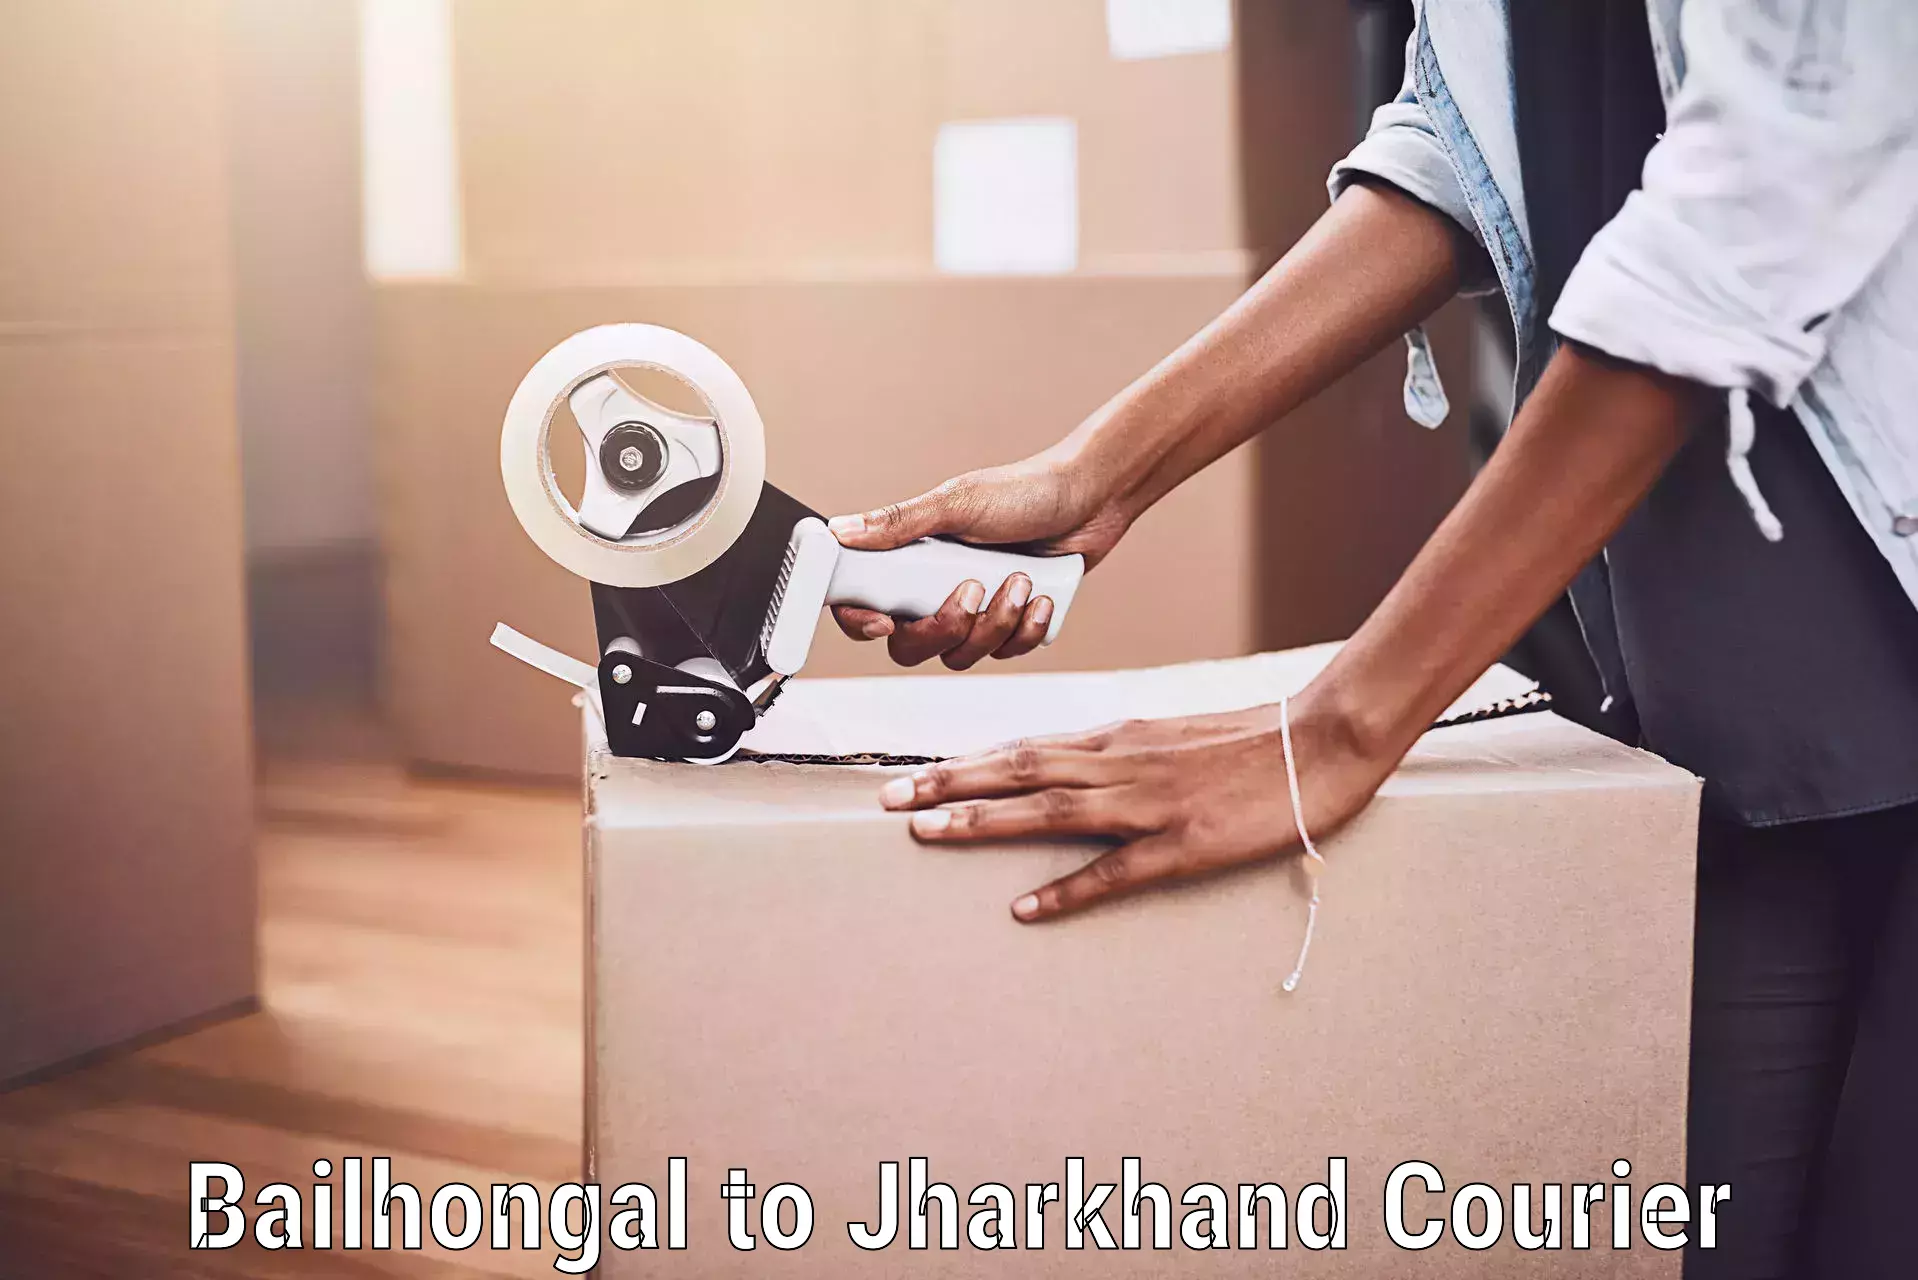 Baggage transport network Bailhongal to Jharkhand